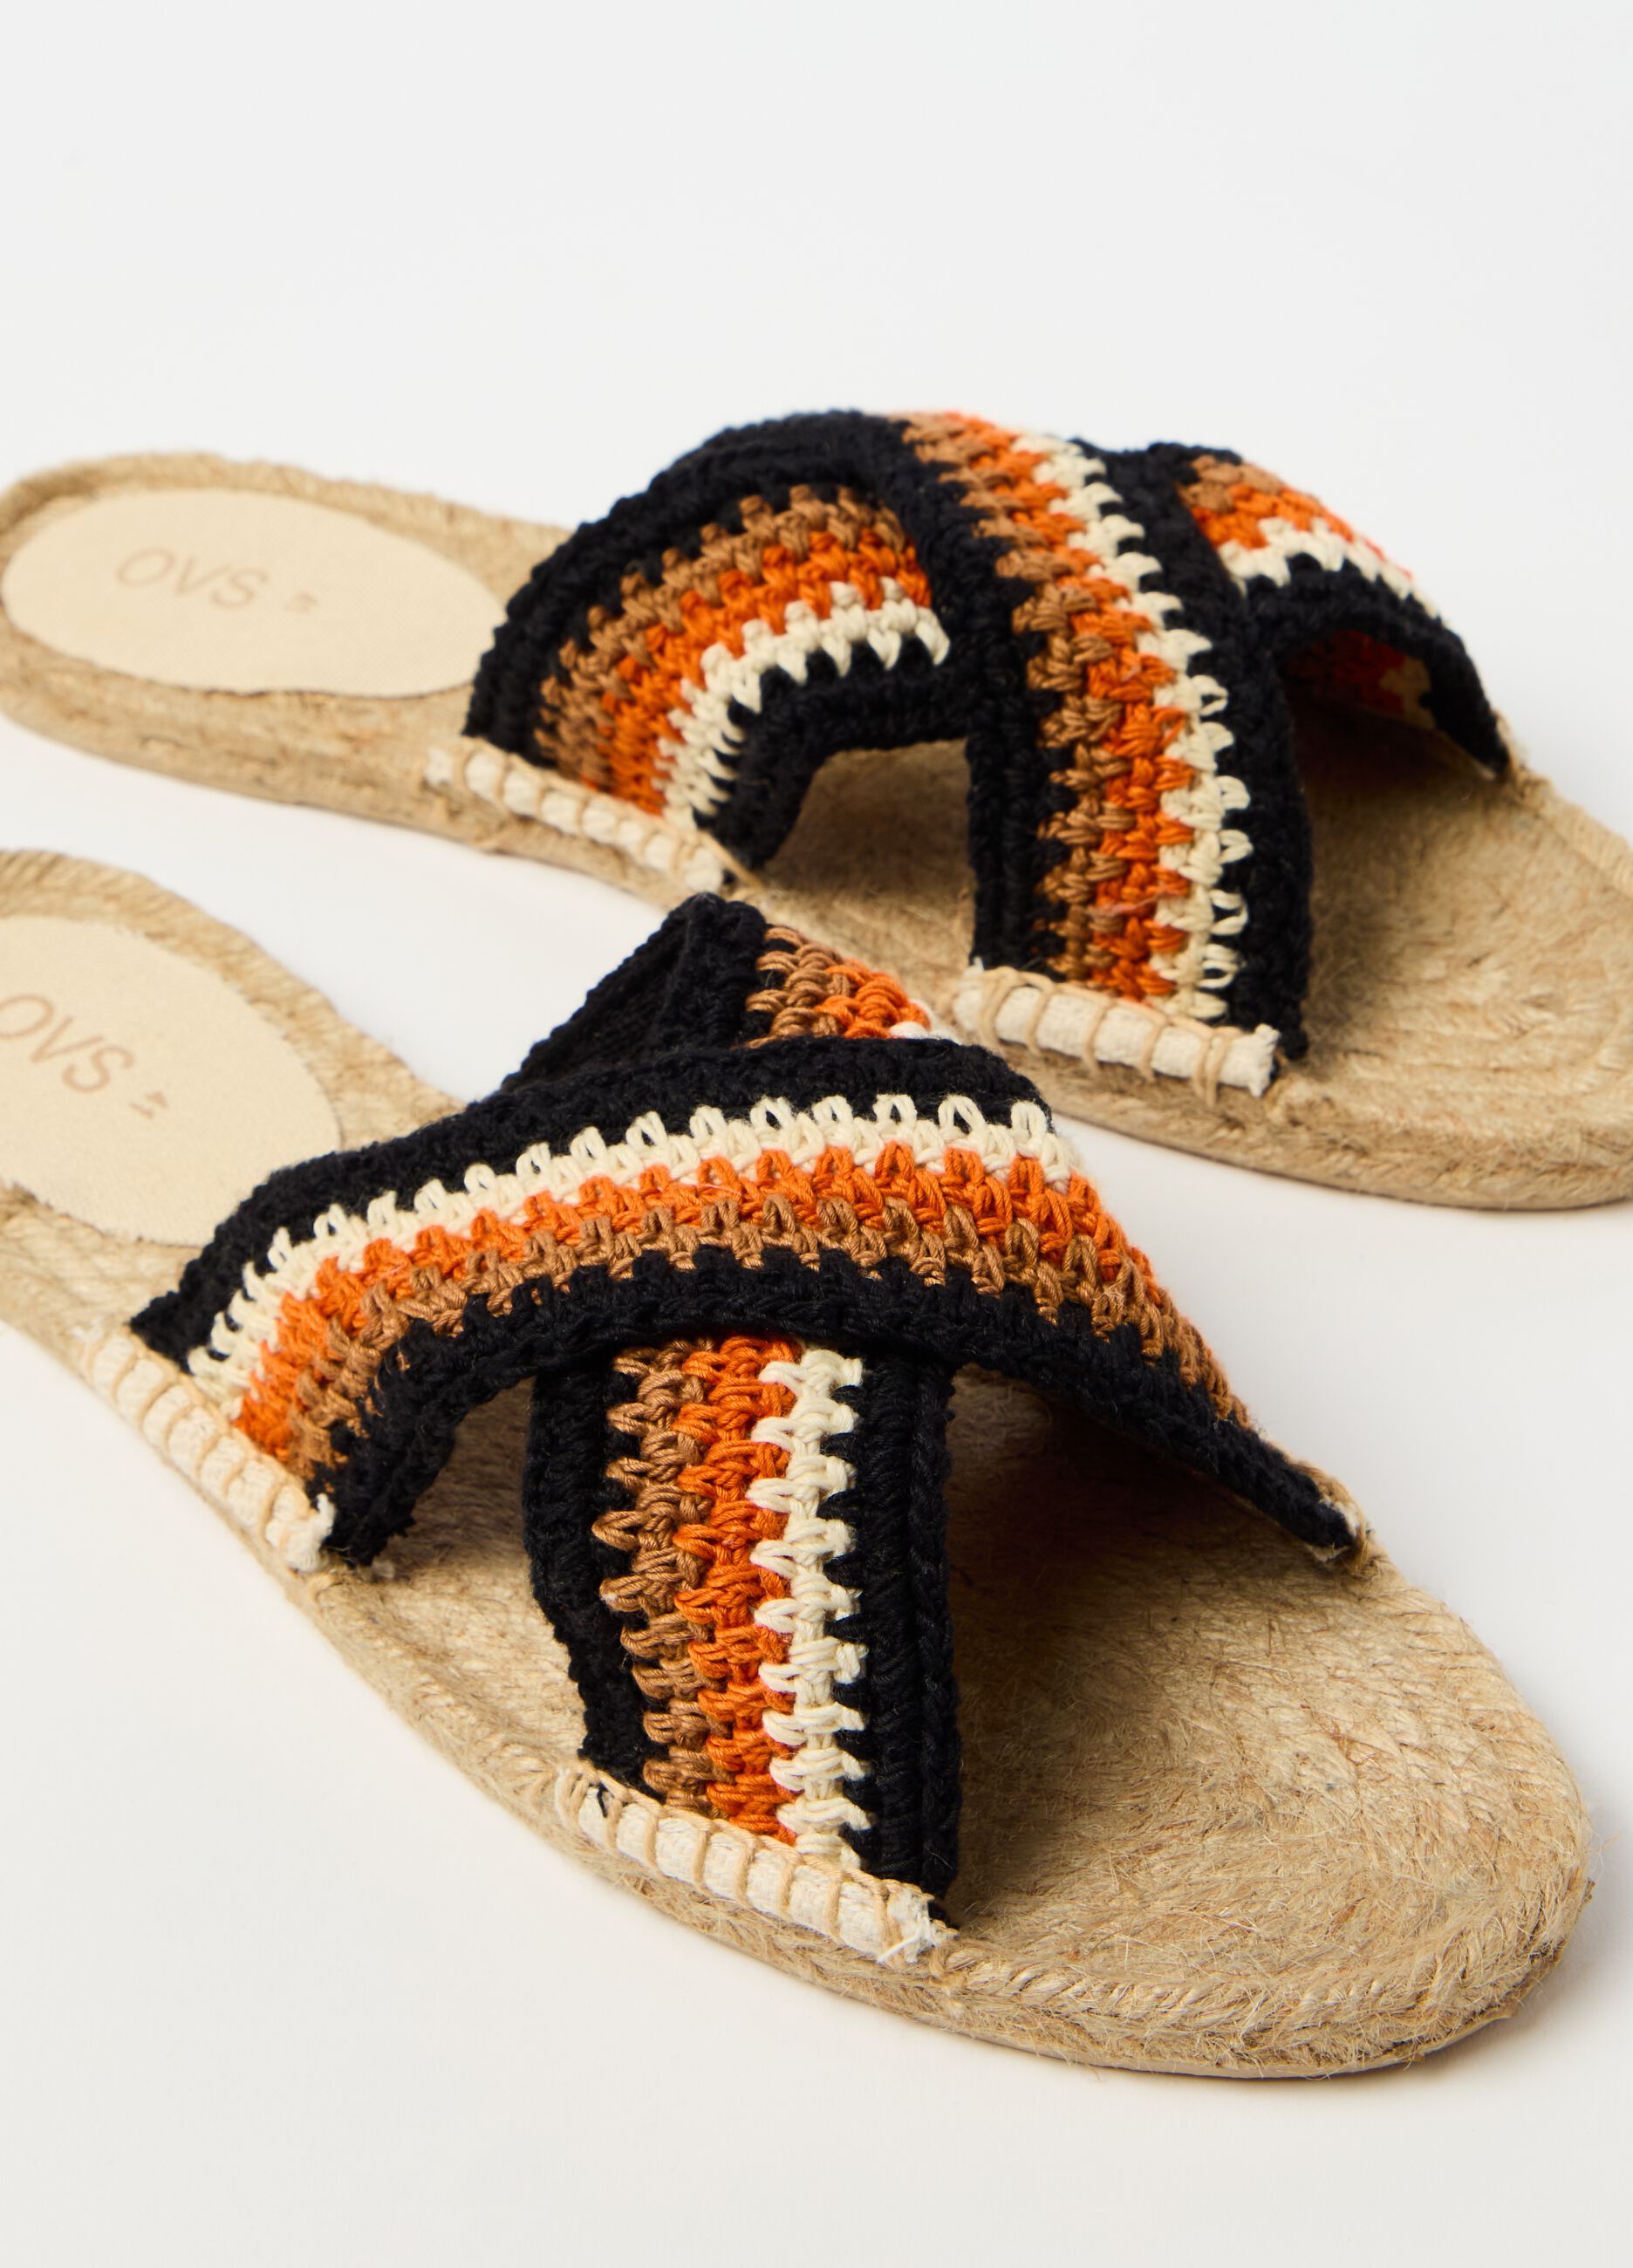 Sandals with crossover crochet straps